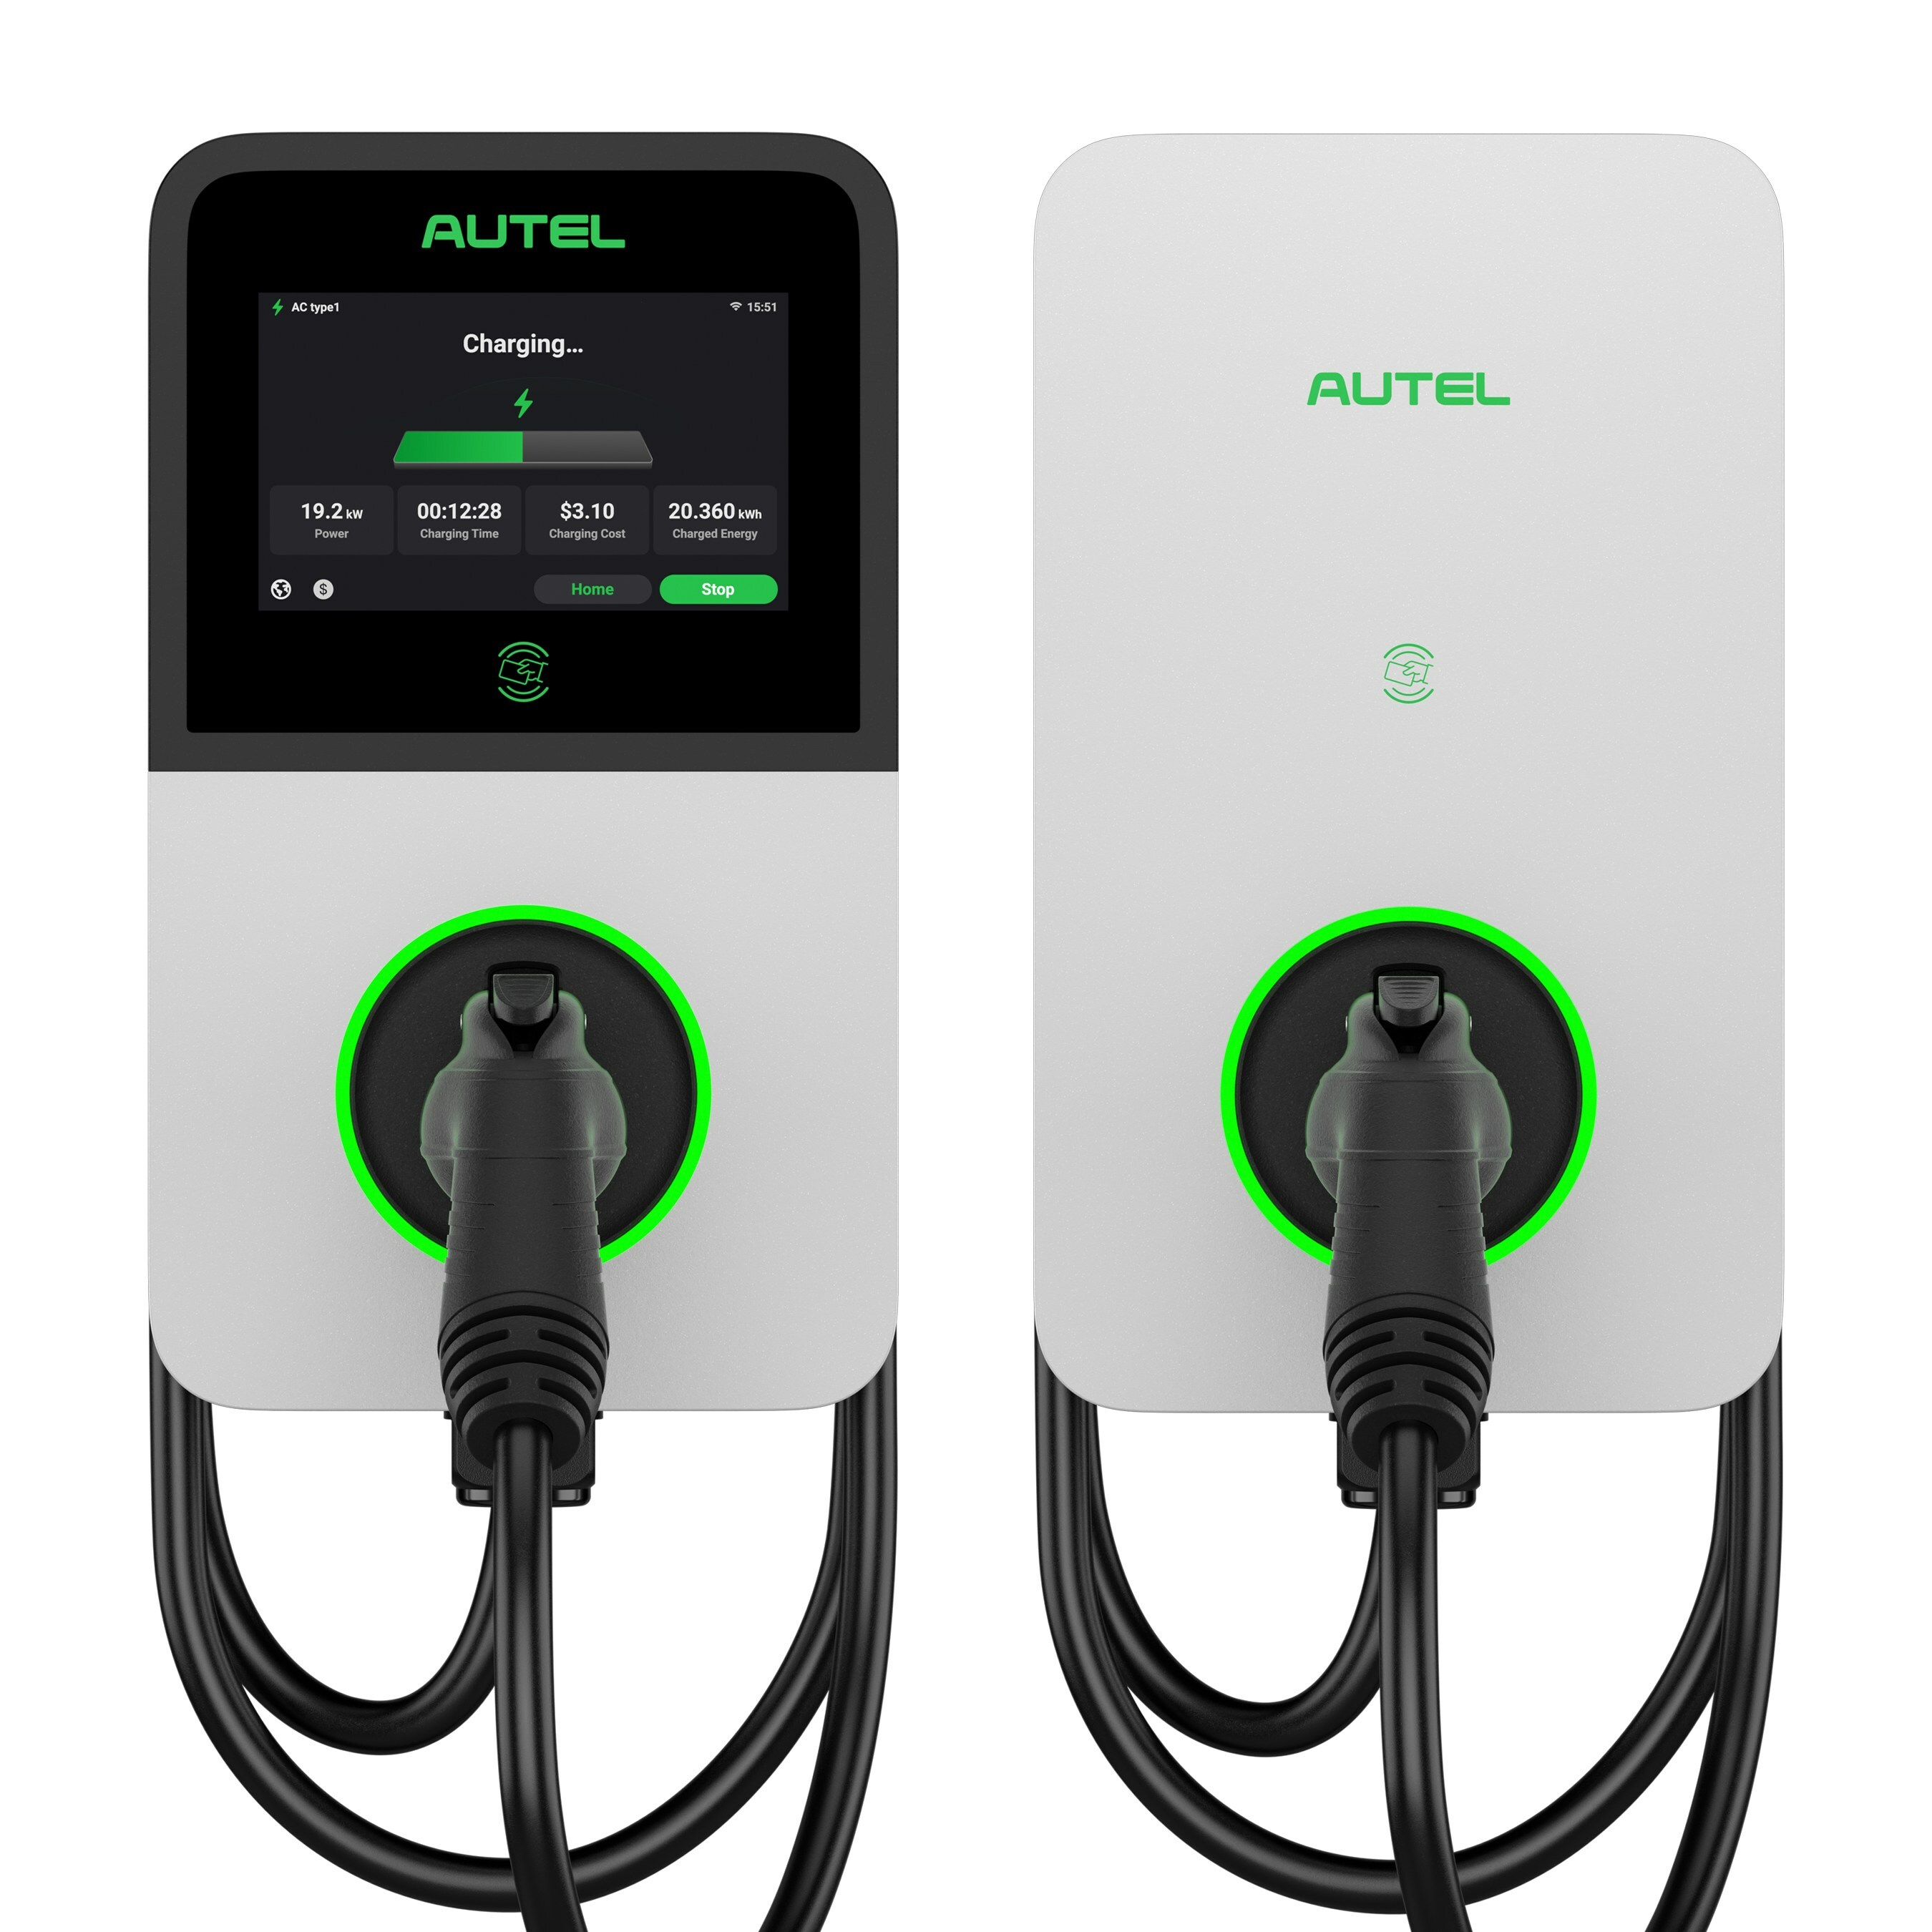 Autel Energy releases the second generation (G2) of their popular MaxiCharger AC Elite EV charger series, including commercial (left) and residential (right) models shown above. Photo: Autel